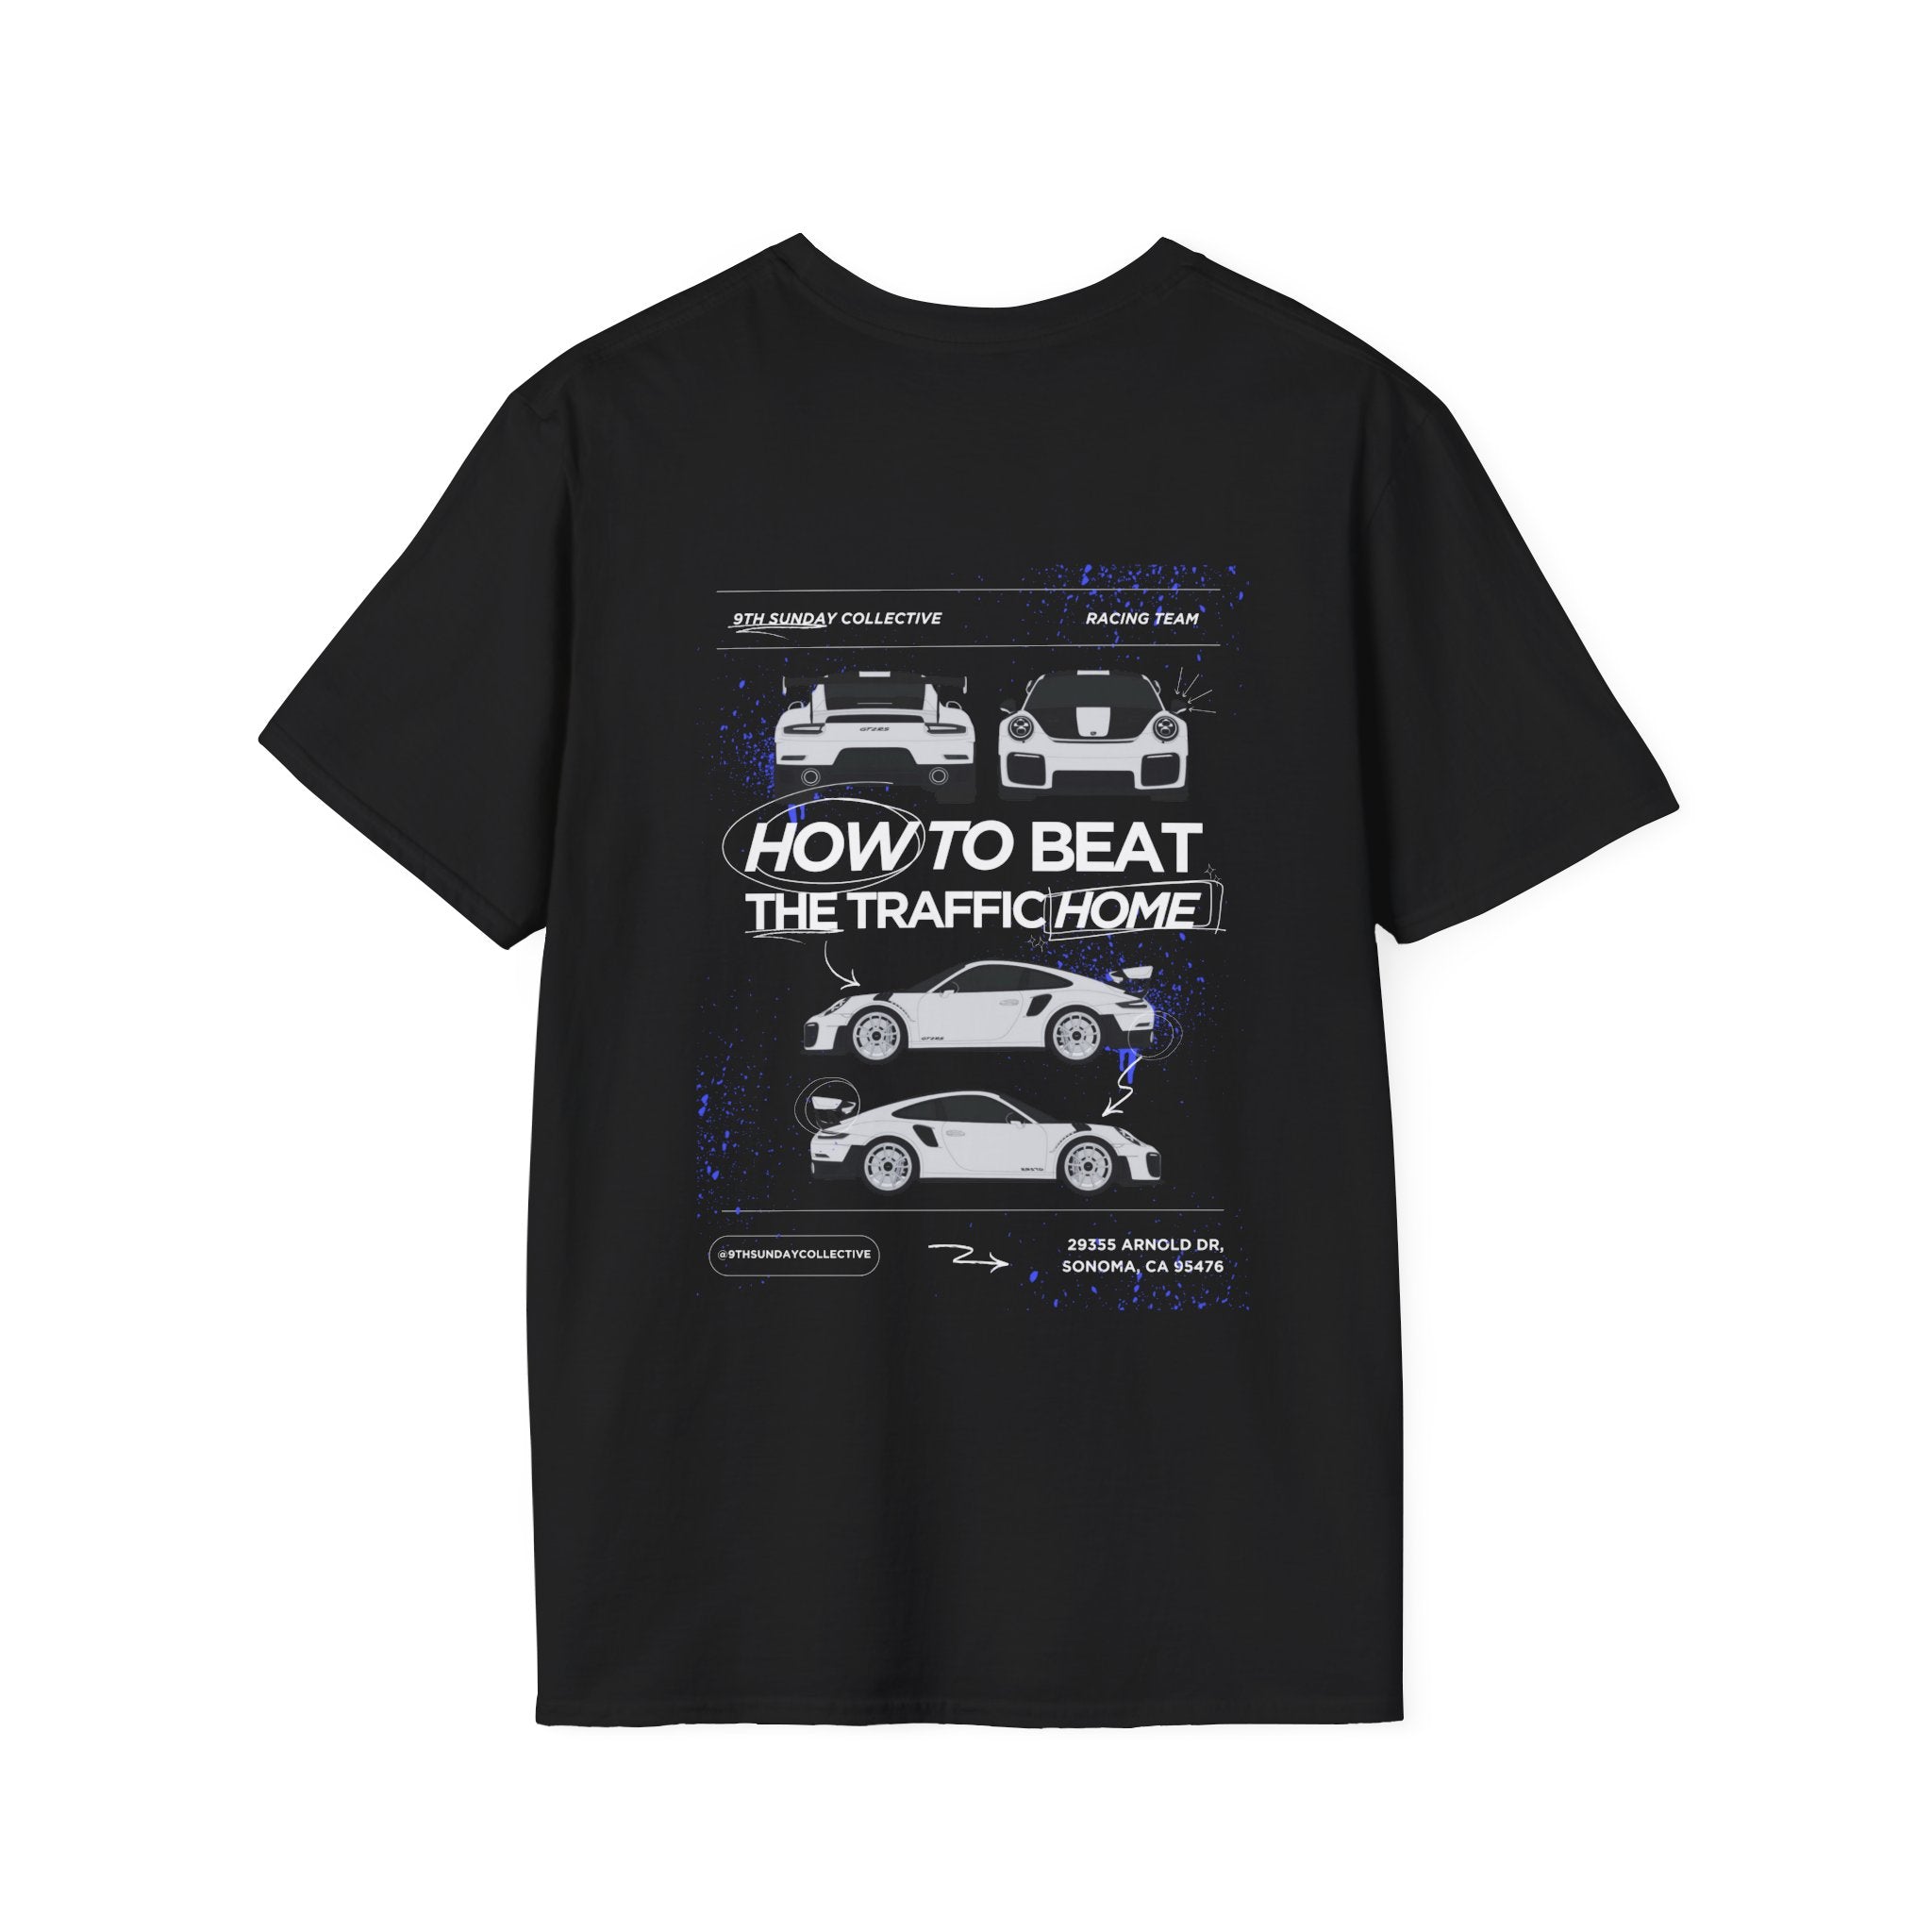 HOW TO BEAT THE TRAFFIC HOME TEE